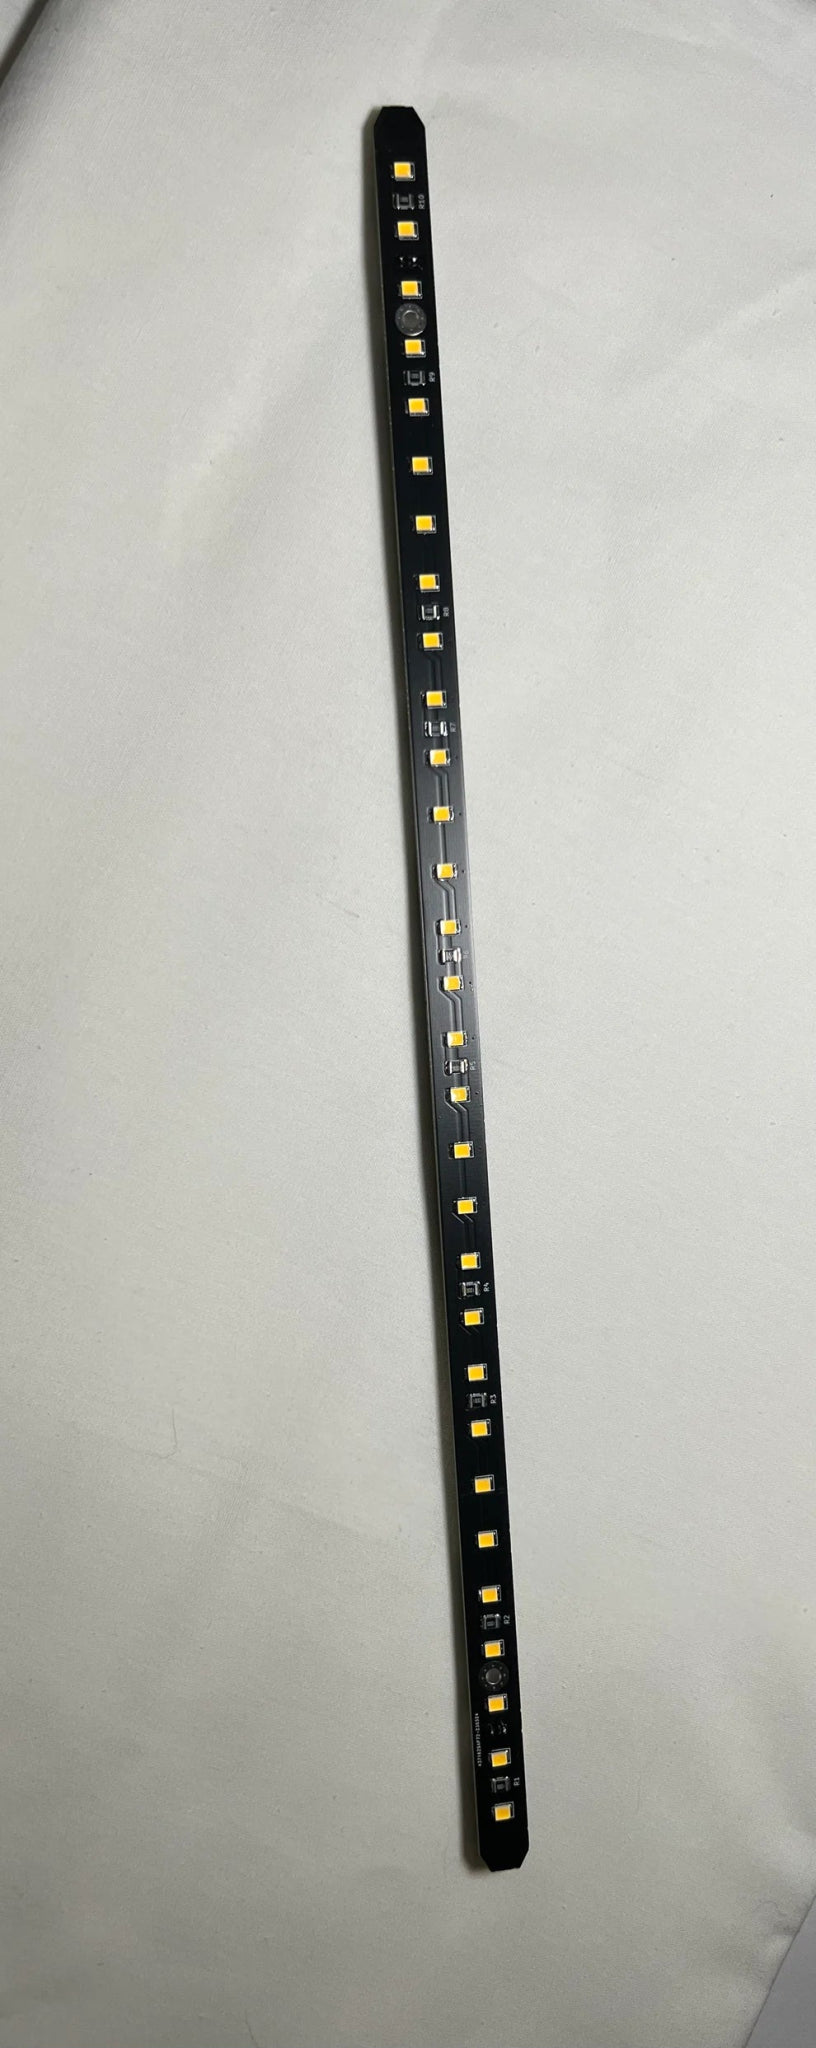 Daylight on a stick XXL edition (370mm) PCB LEDs for 3D Printers (V2 / Trident) - West3D 3D Printing Supplies - West3D Printing Community Partner